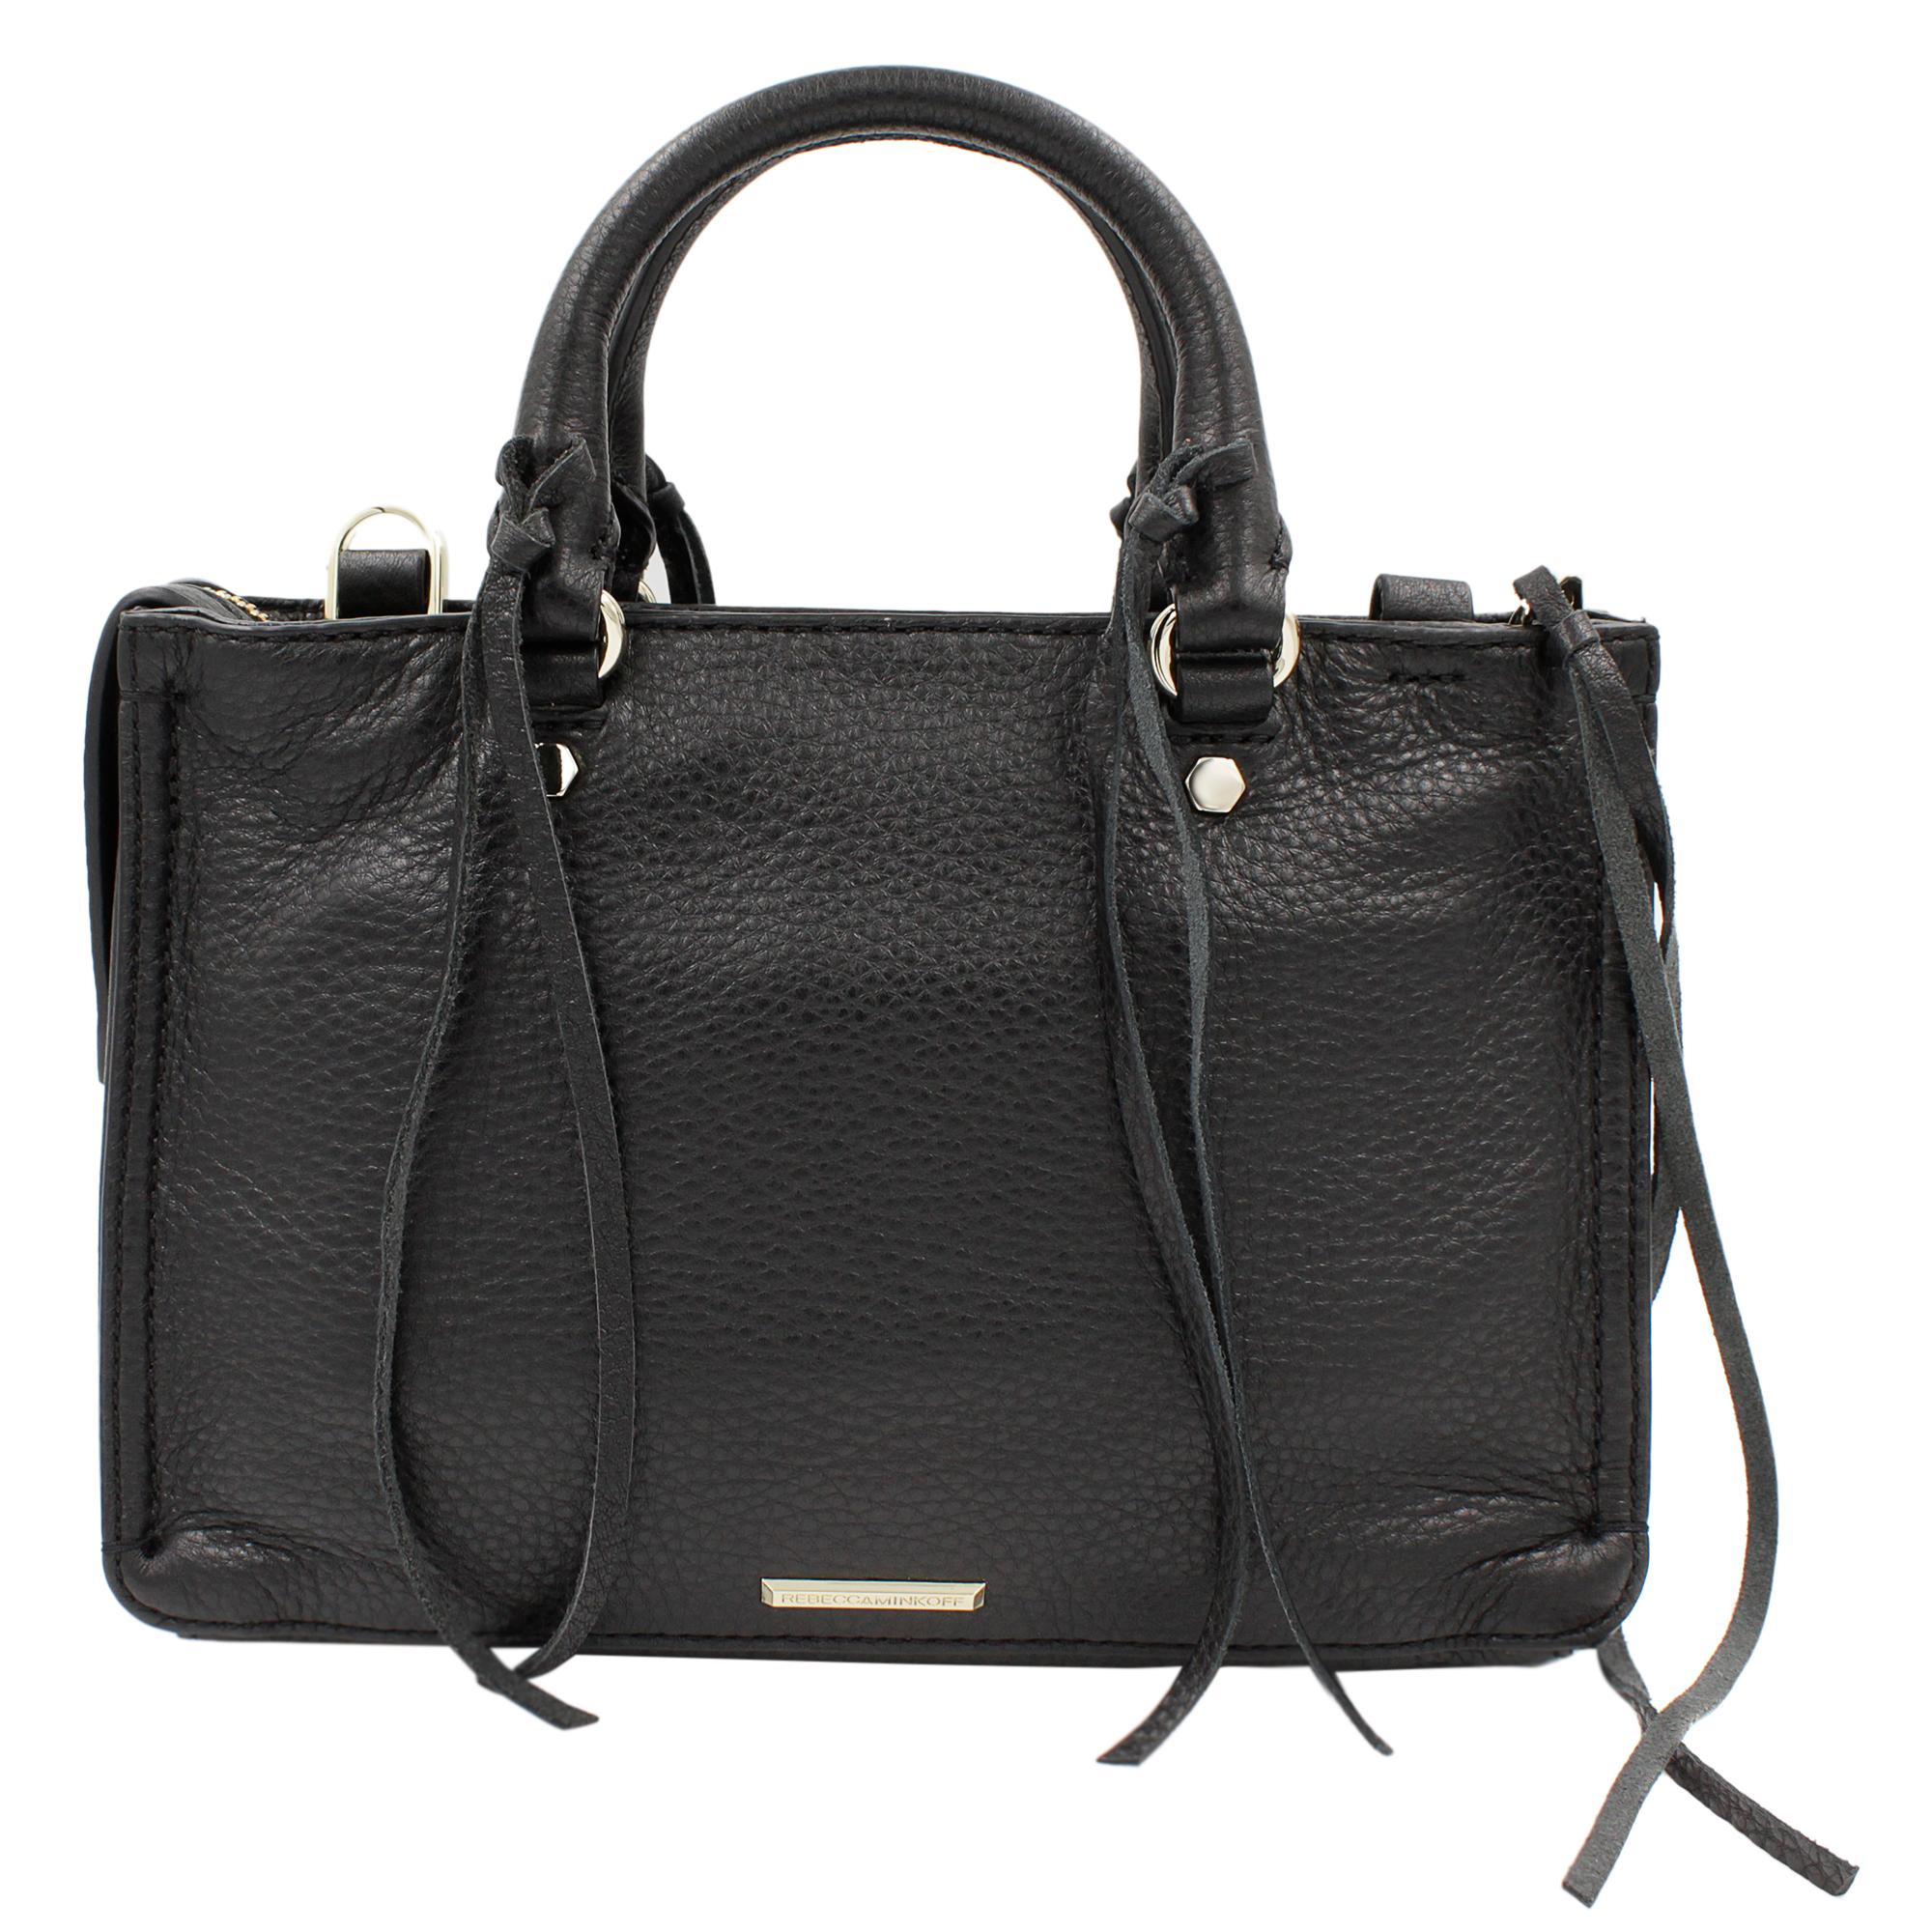 This is Brand new Rebecca Minkoff Micro Regan Satchel Leather Black Bag HS161PBX61. The gold tone hardware has minor scratches. Comes Without Dust Bag. Height- 7.5 Inch Length-9.5 Inch Width -3.75 inch Detachable Shoulder